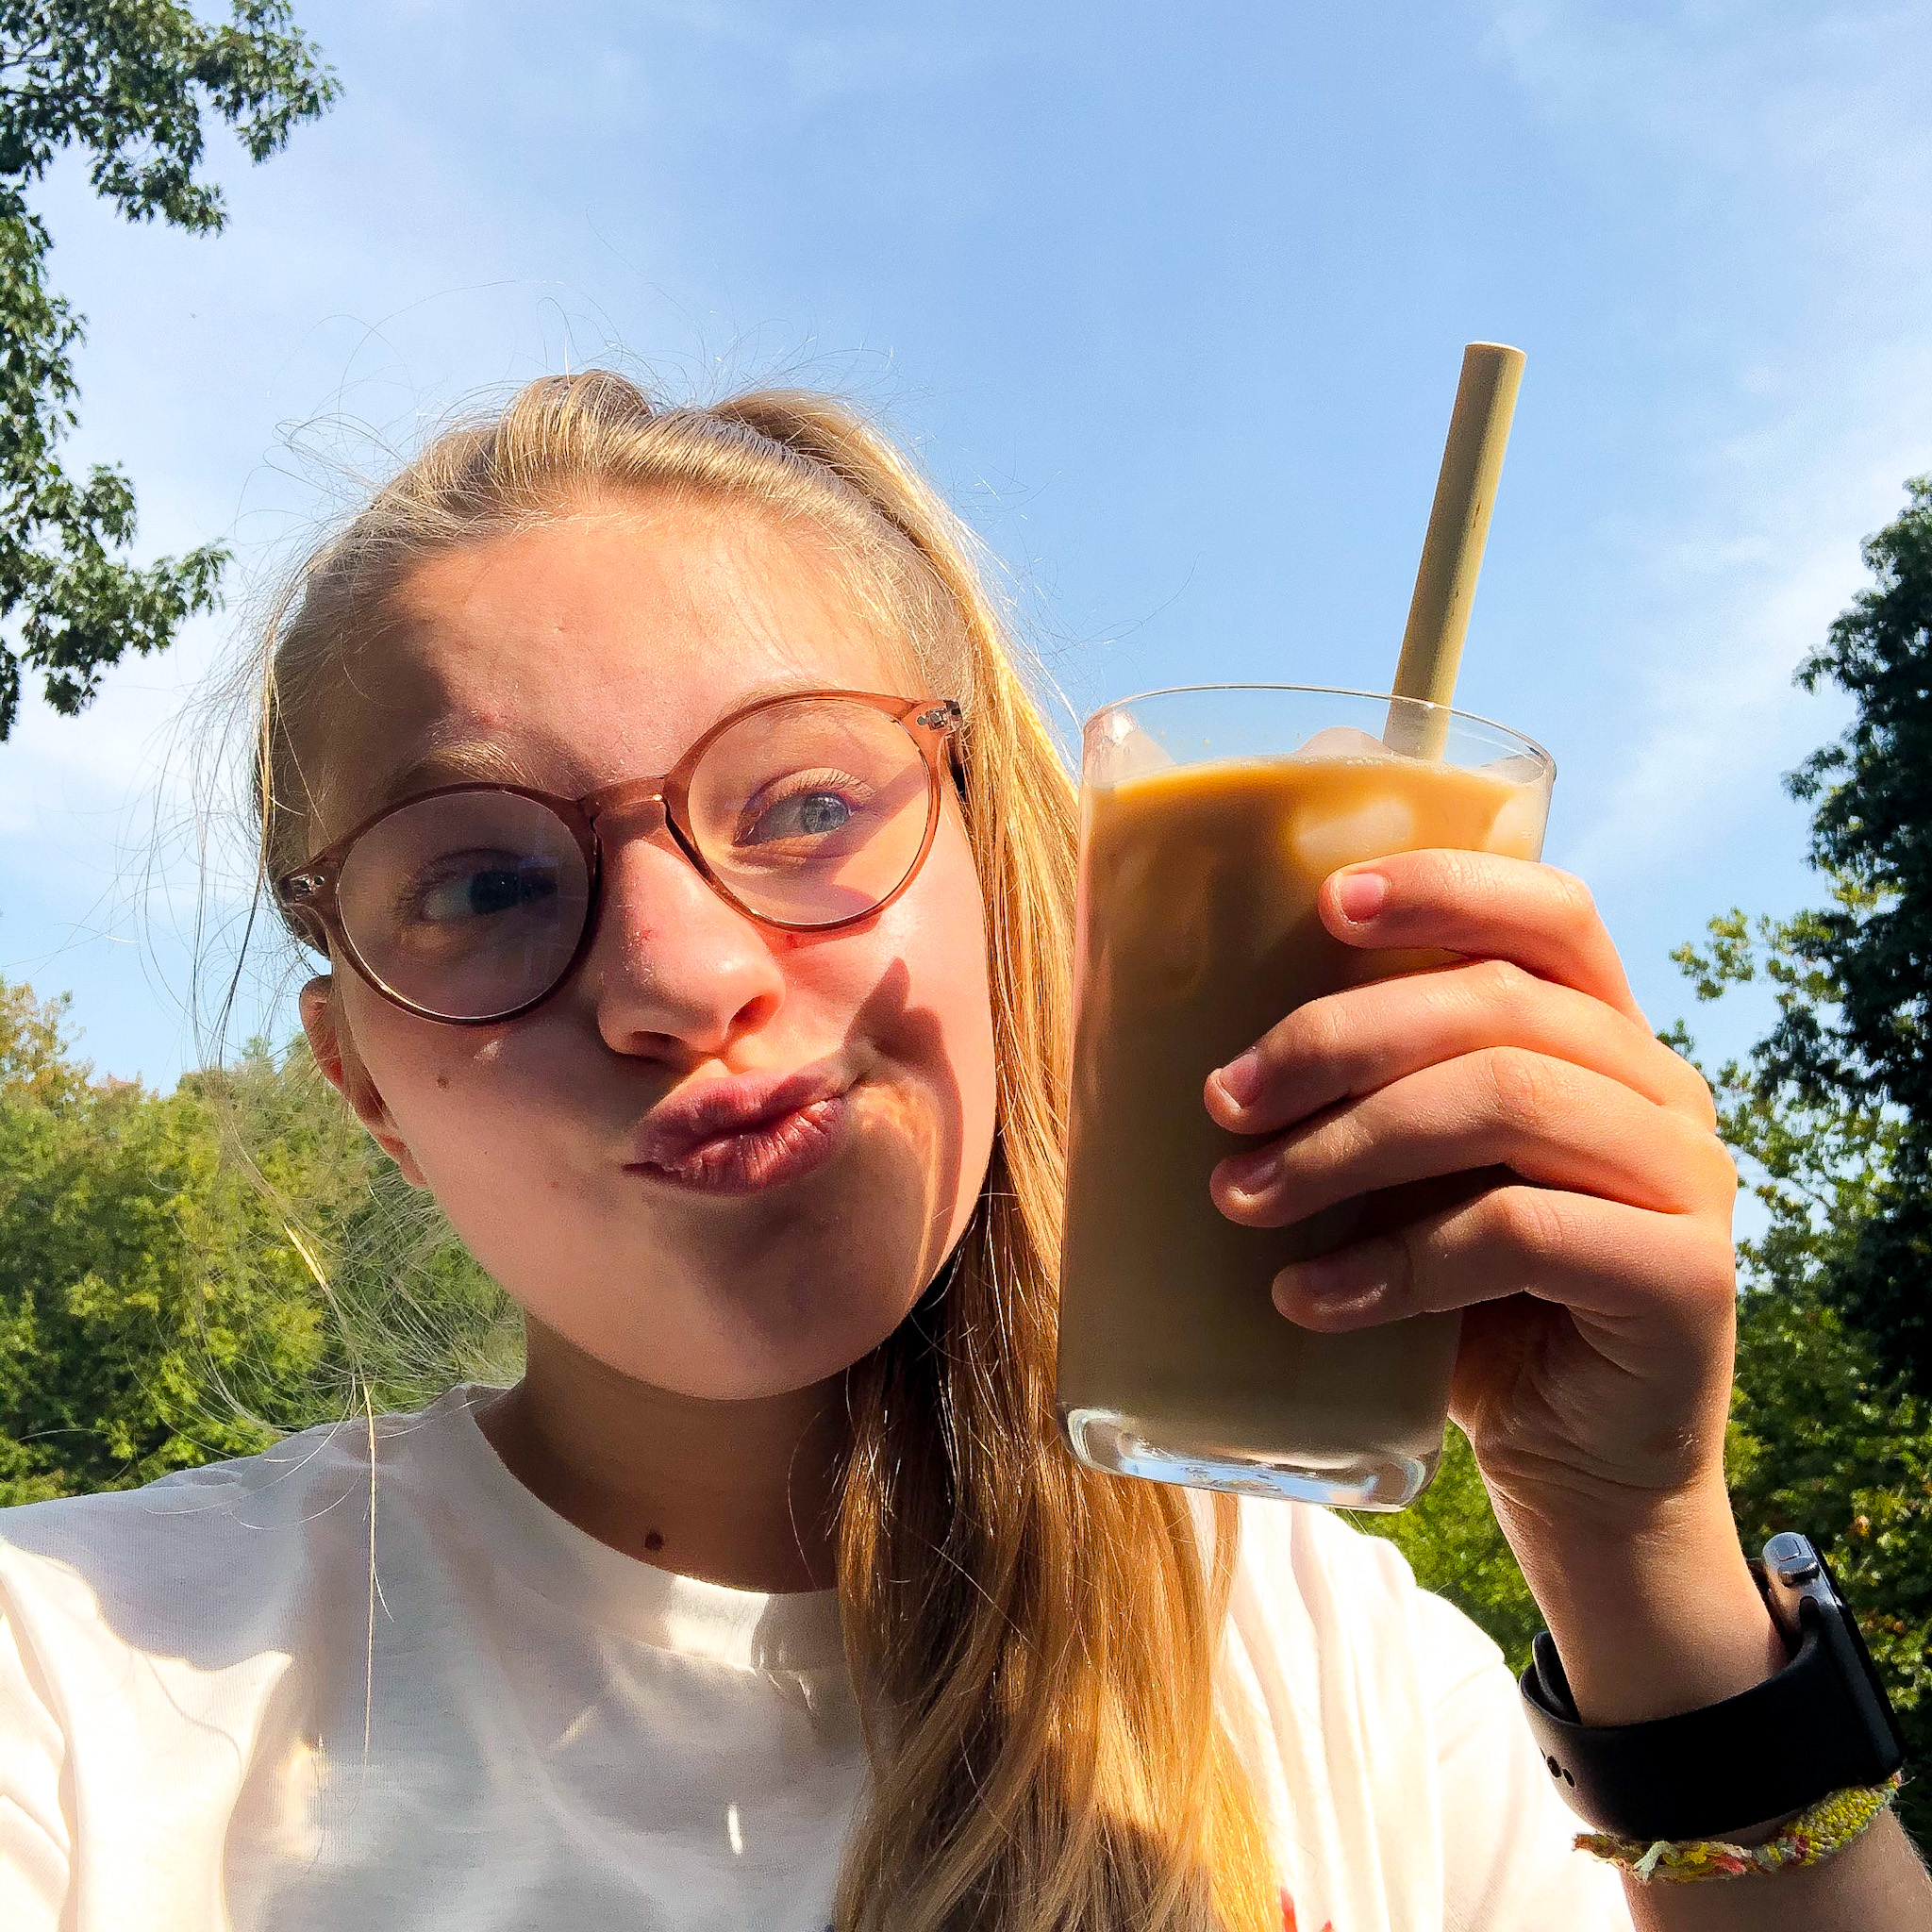 me drinking my favorite go-to iced coffee recipe